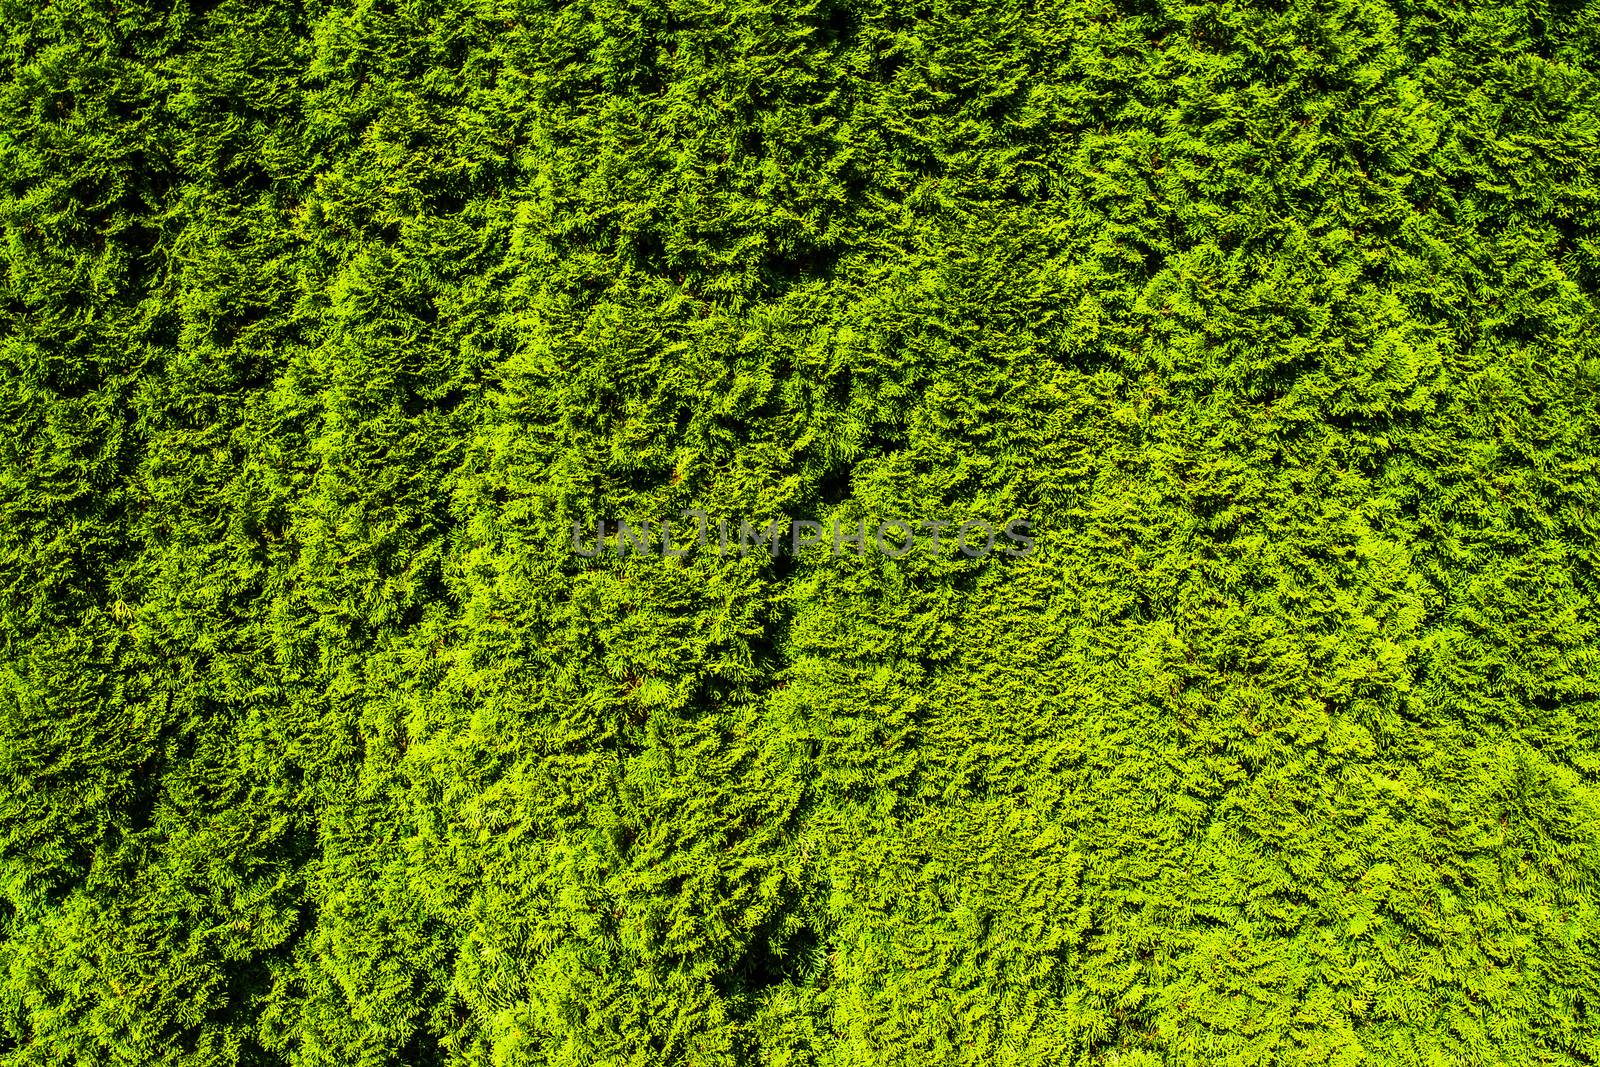 Natural Green Leaf Wall Texture for Backdrop. Vertical Fence Design.